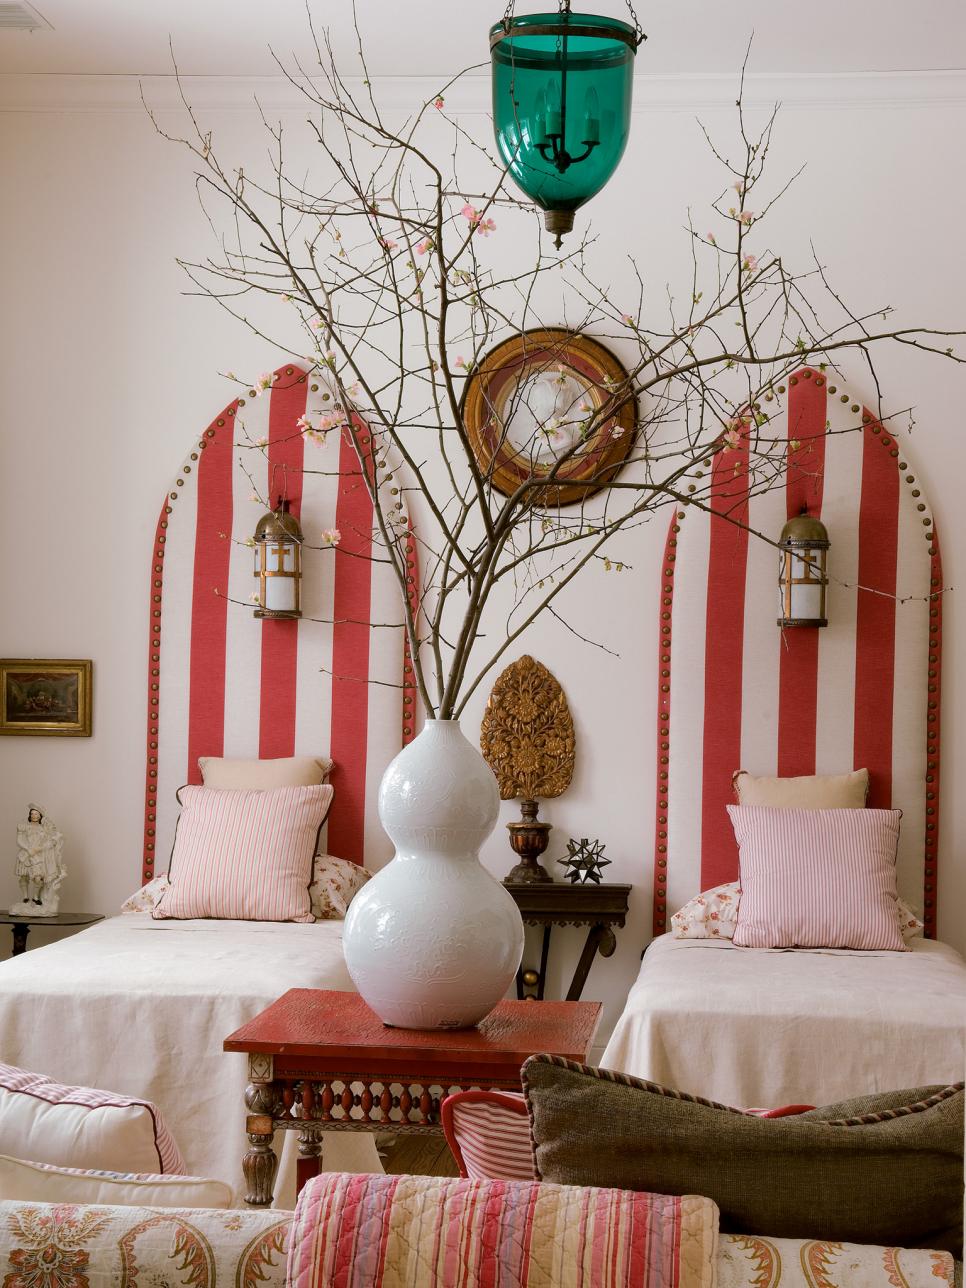 Bedroom With Red and White Striped Twin Beds and Tree Branches in Vase